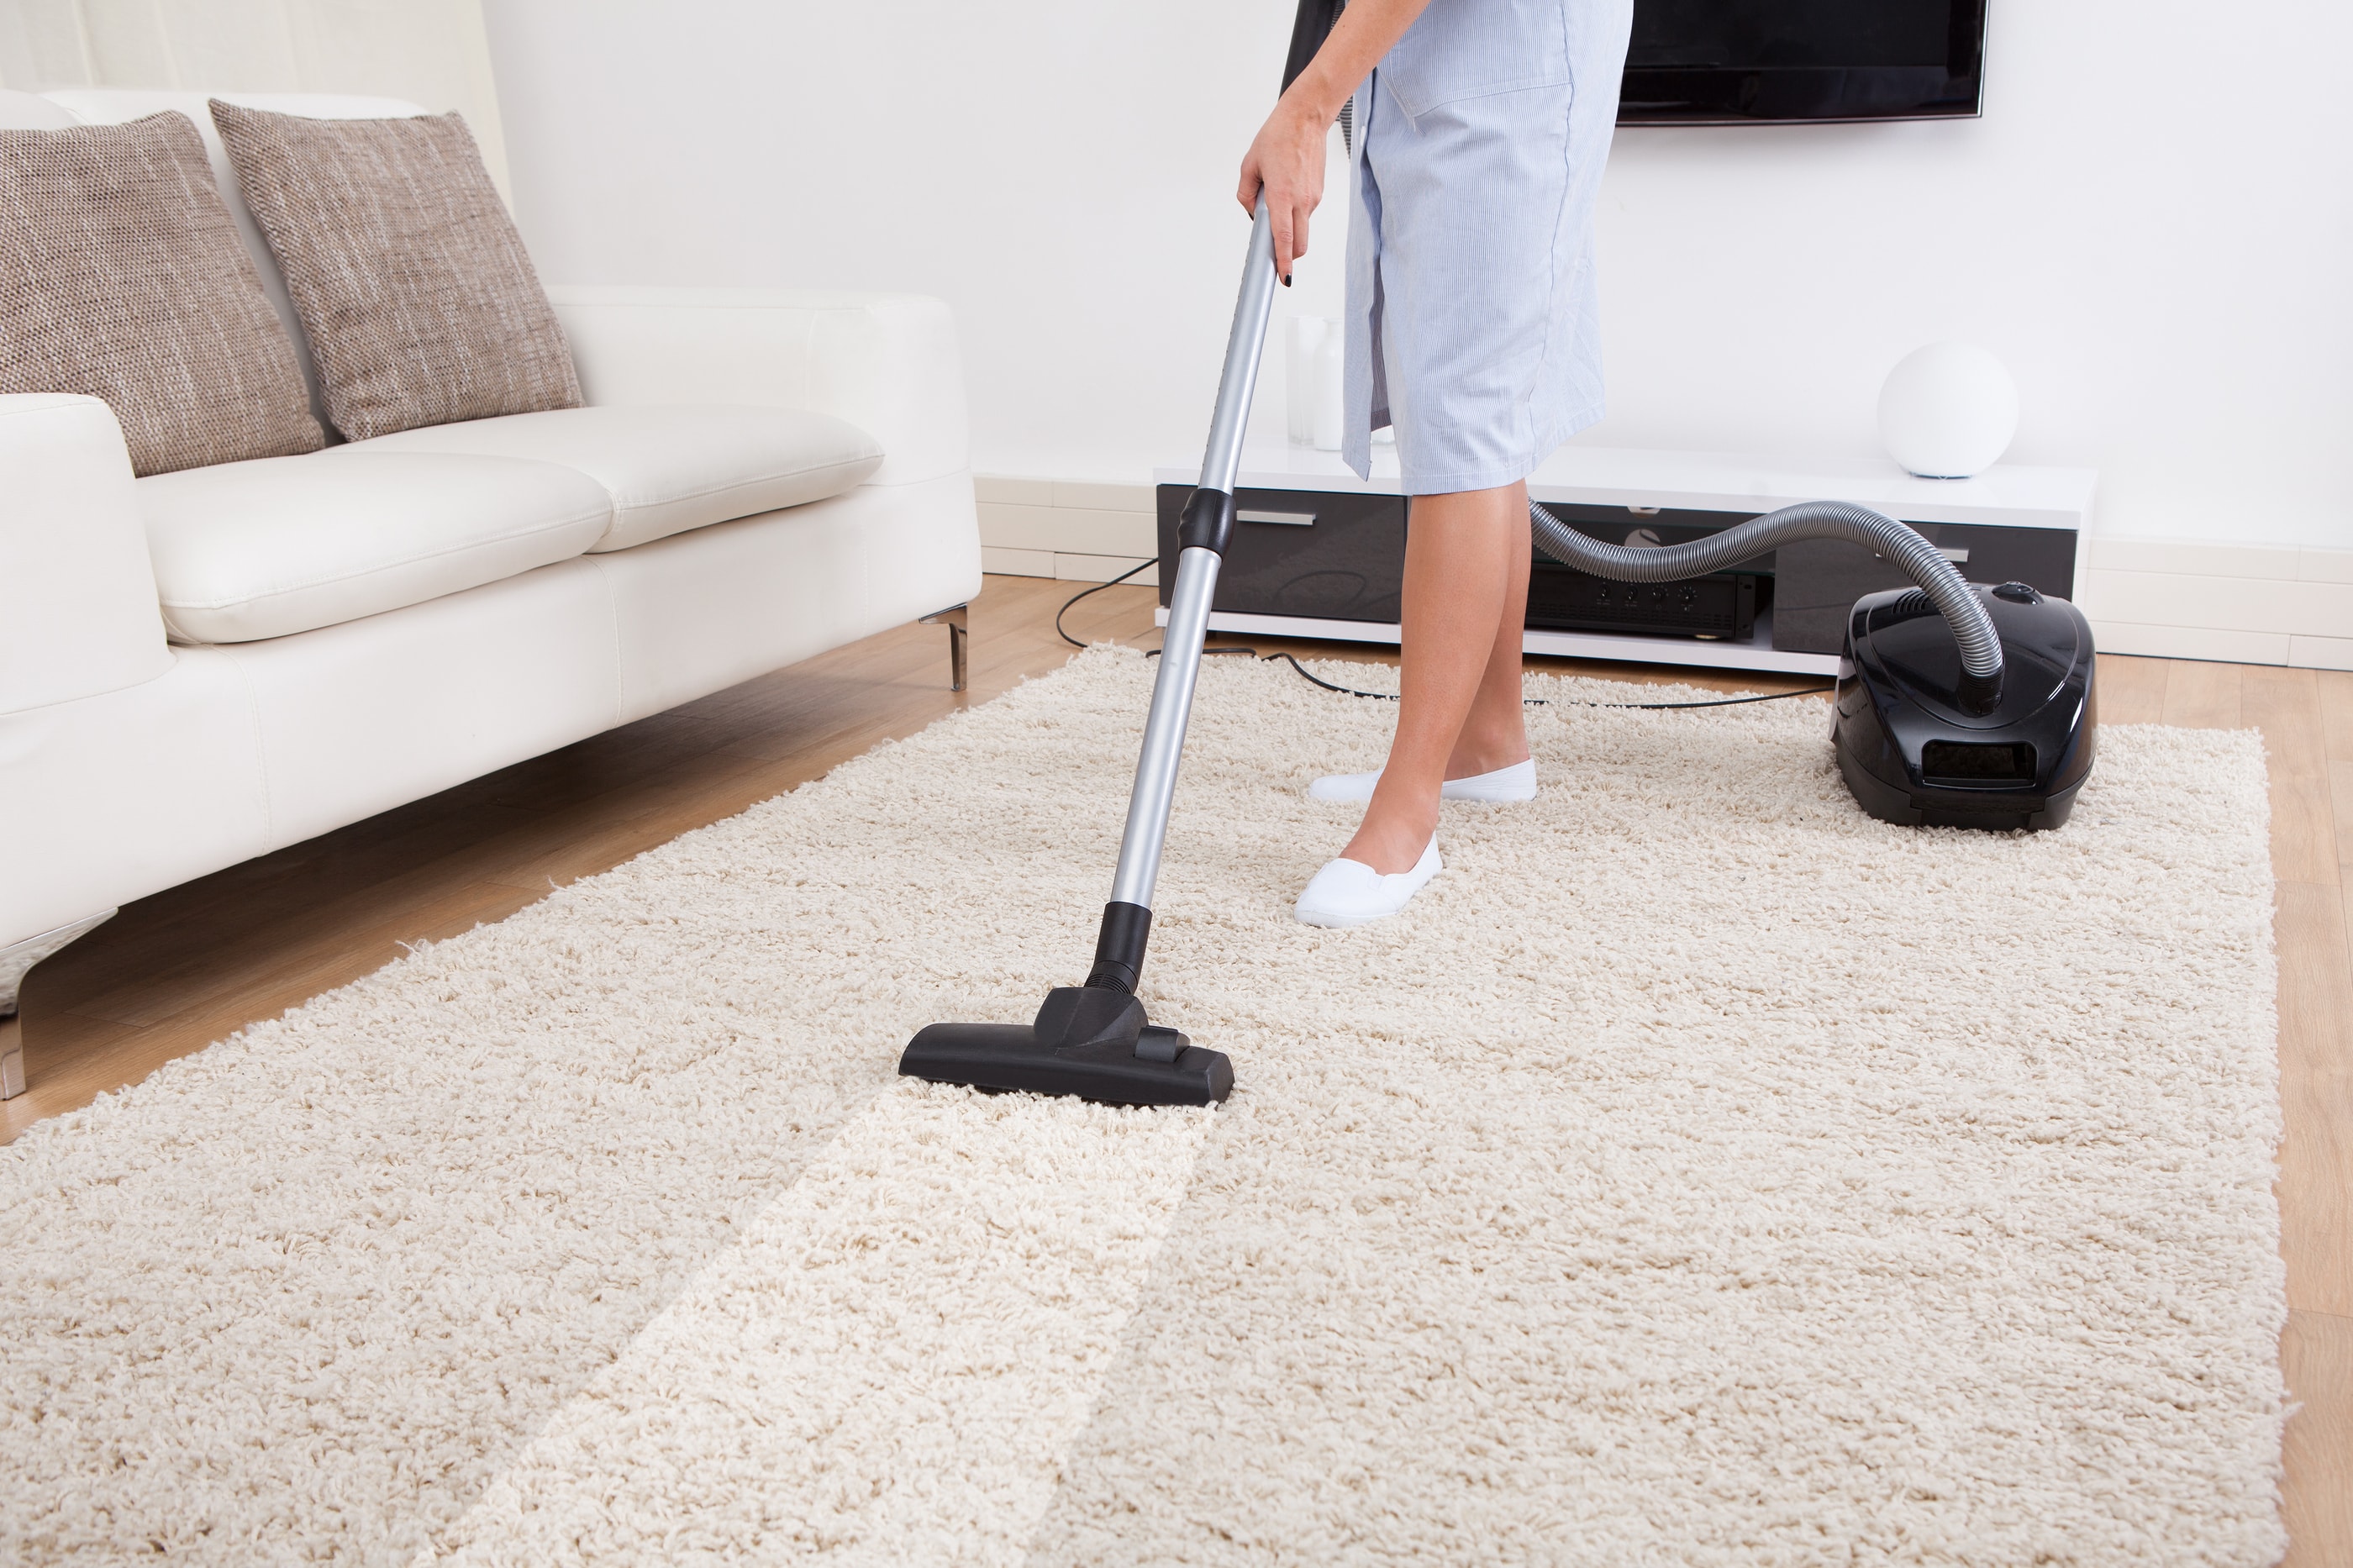 Prescott Valley Carpet Cleaning. Should Carpets Stay Wet?